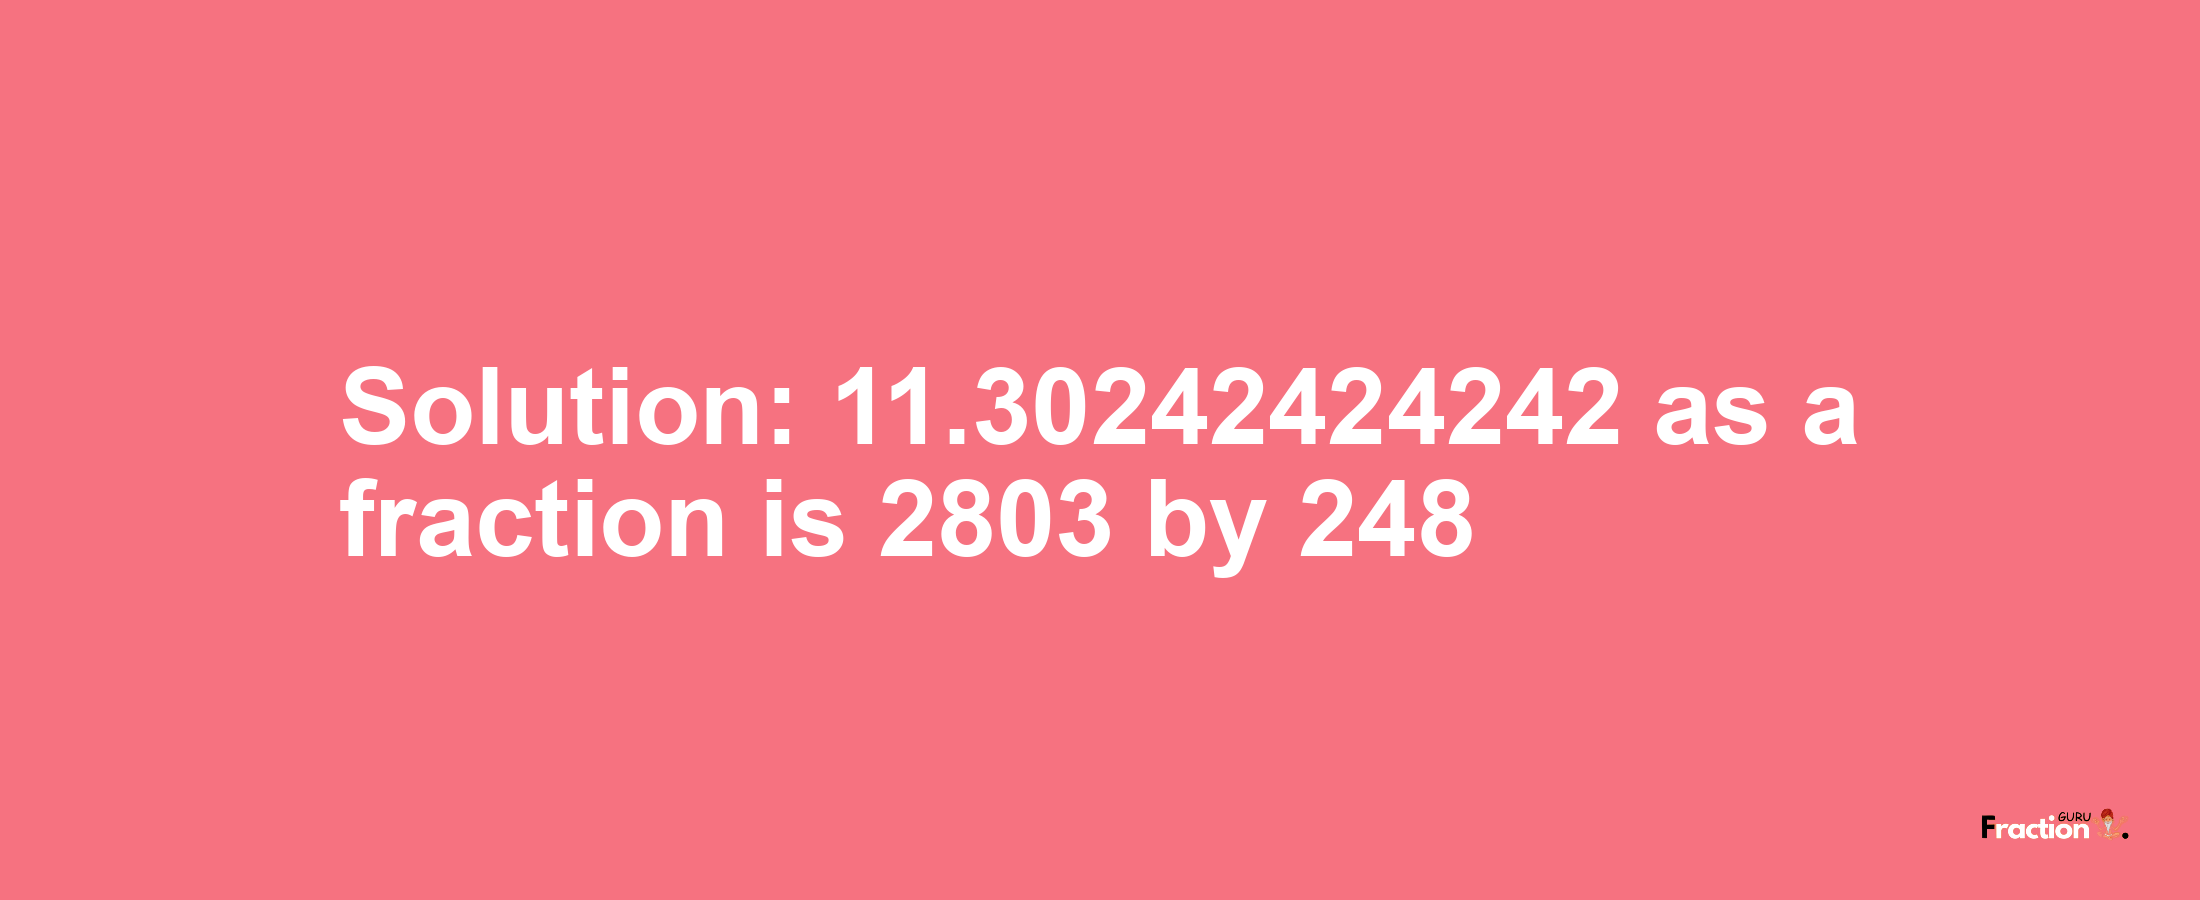 Solution:11.30242424242 as a fraction is 2803/248